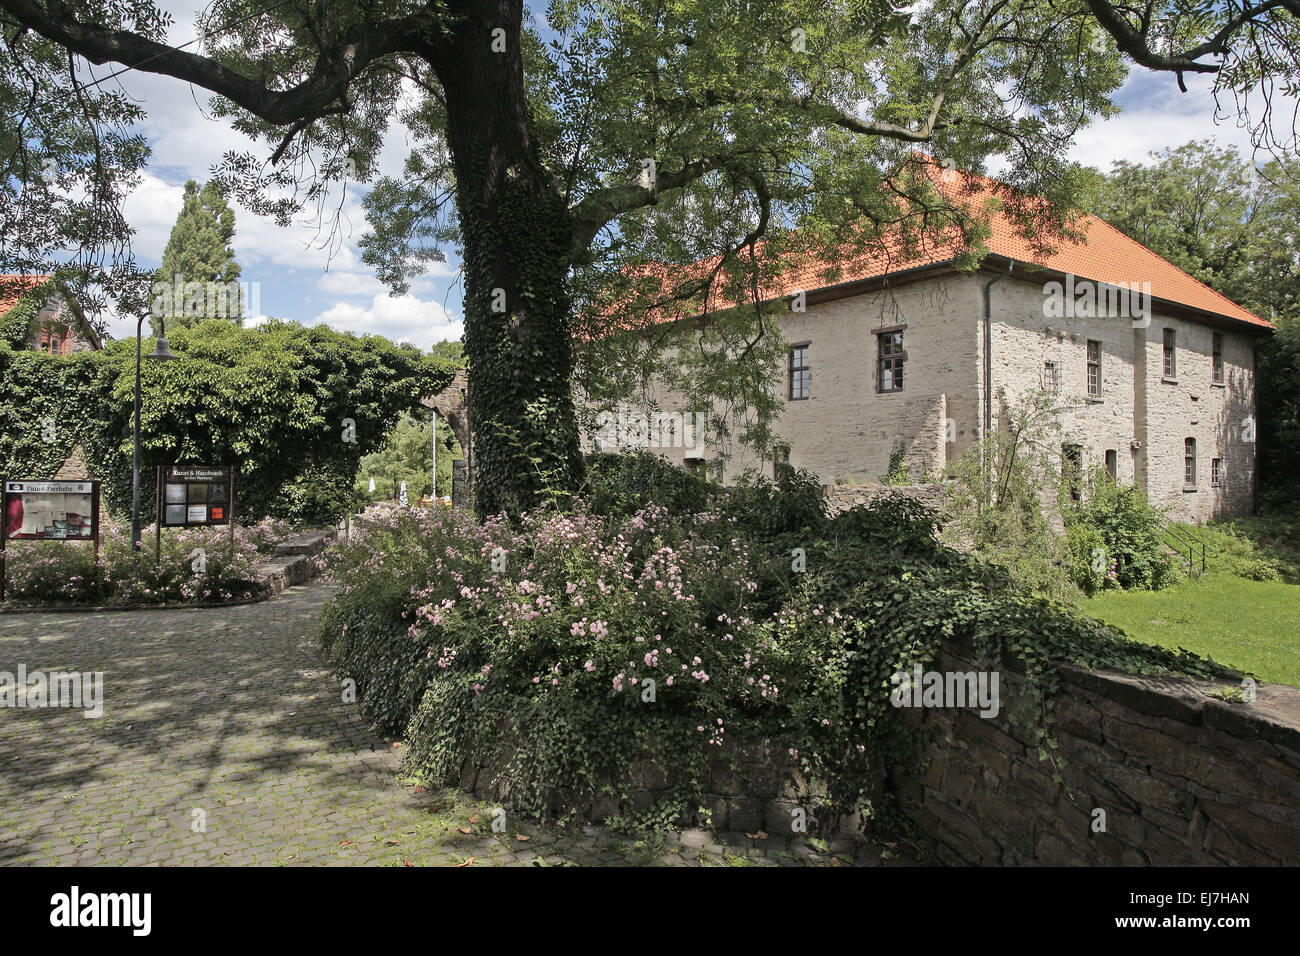 House Herbede, Witten, Germany Stock Photo - Alamy